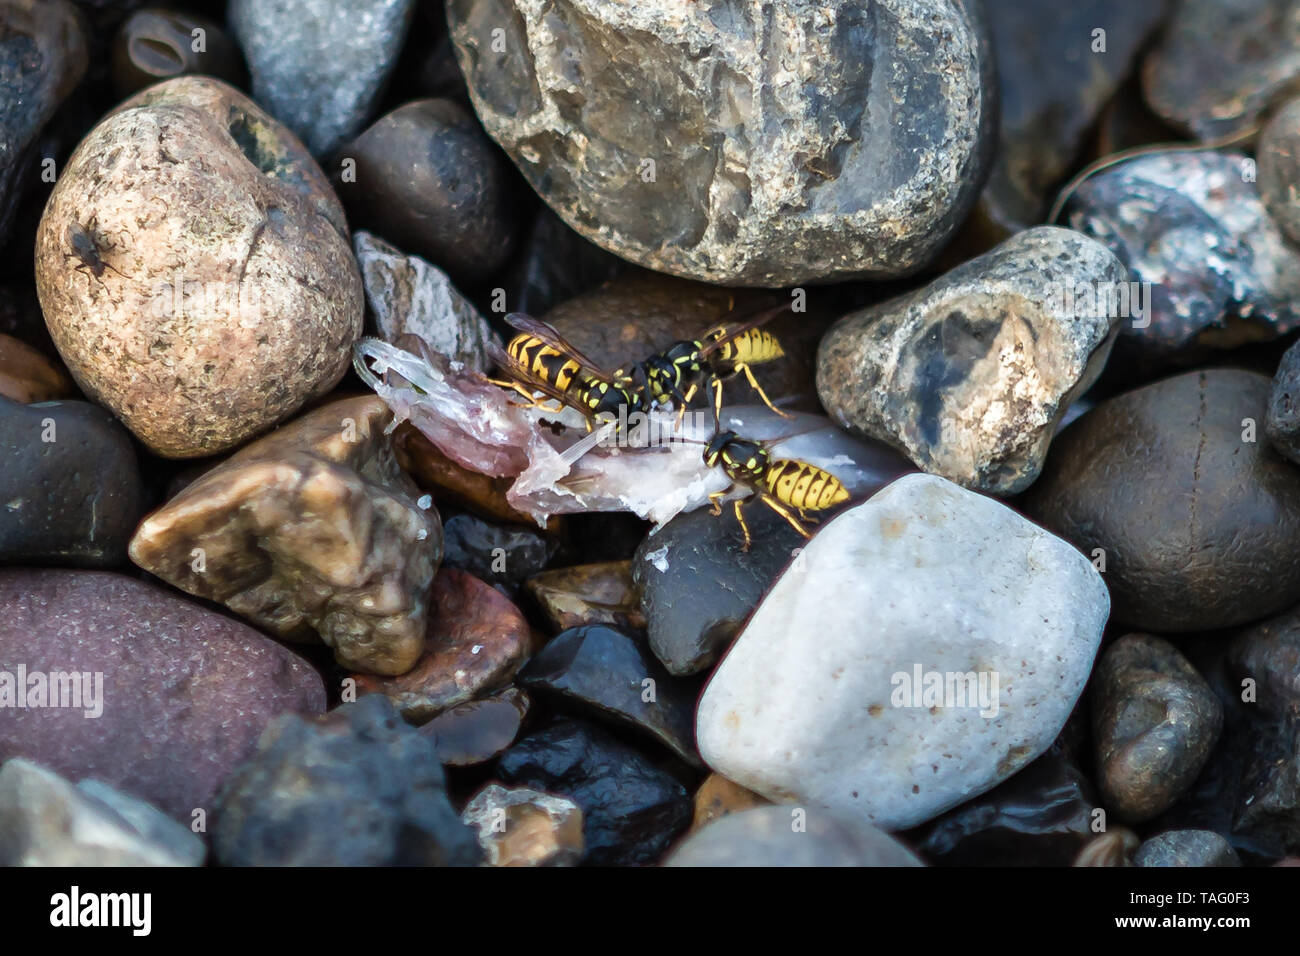 Wasps feed on a dead fish. Stock Photo